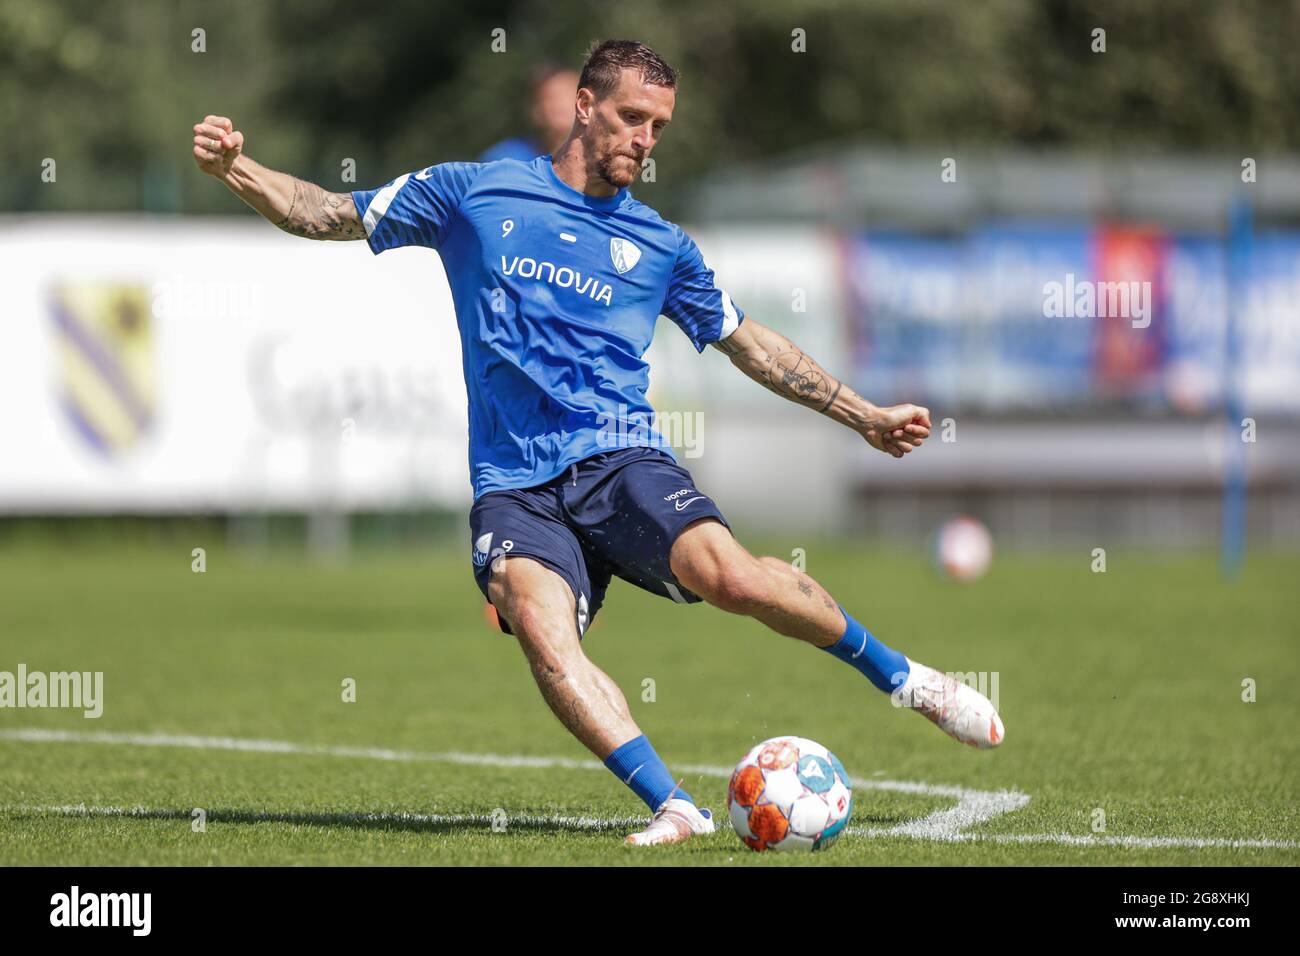 Gais, Italy. 23rd July, 2021. Football: Bundesliga, VfL Bochum training  camp. Bochum's Simon Zoller shoots the ball with his foot. Credit: Tim  Rehbein/dpa - IMPORTANT NOTE: In accordance with the regulations of